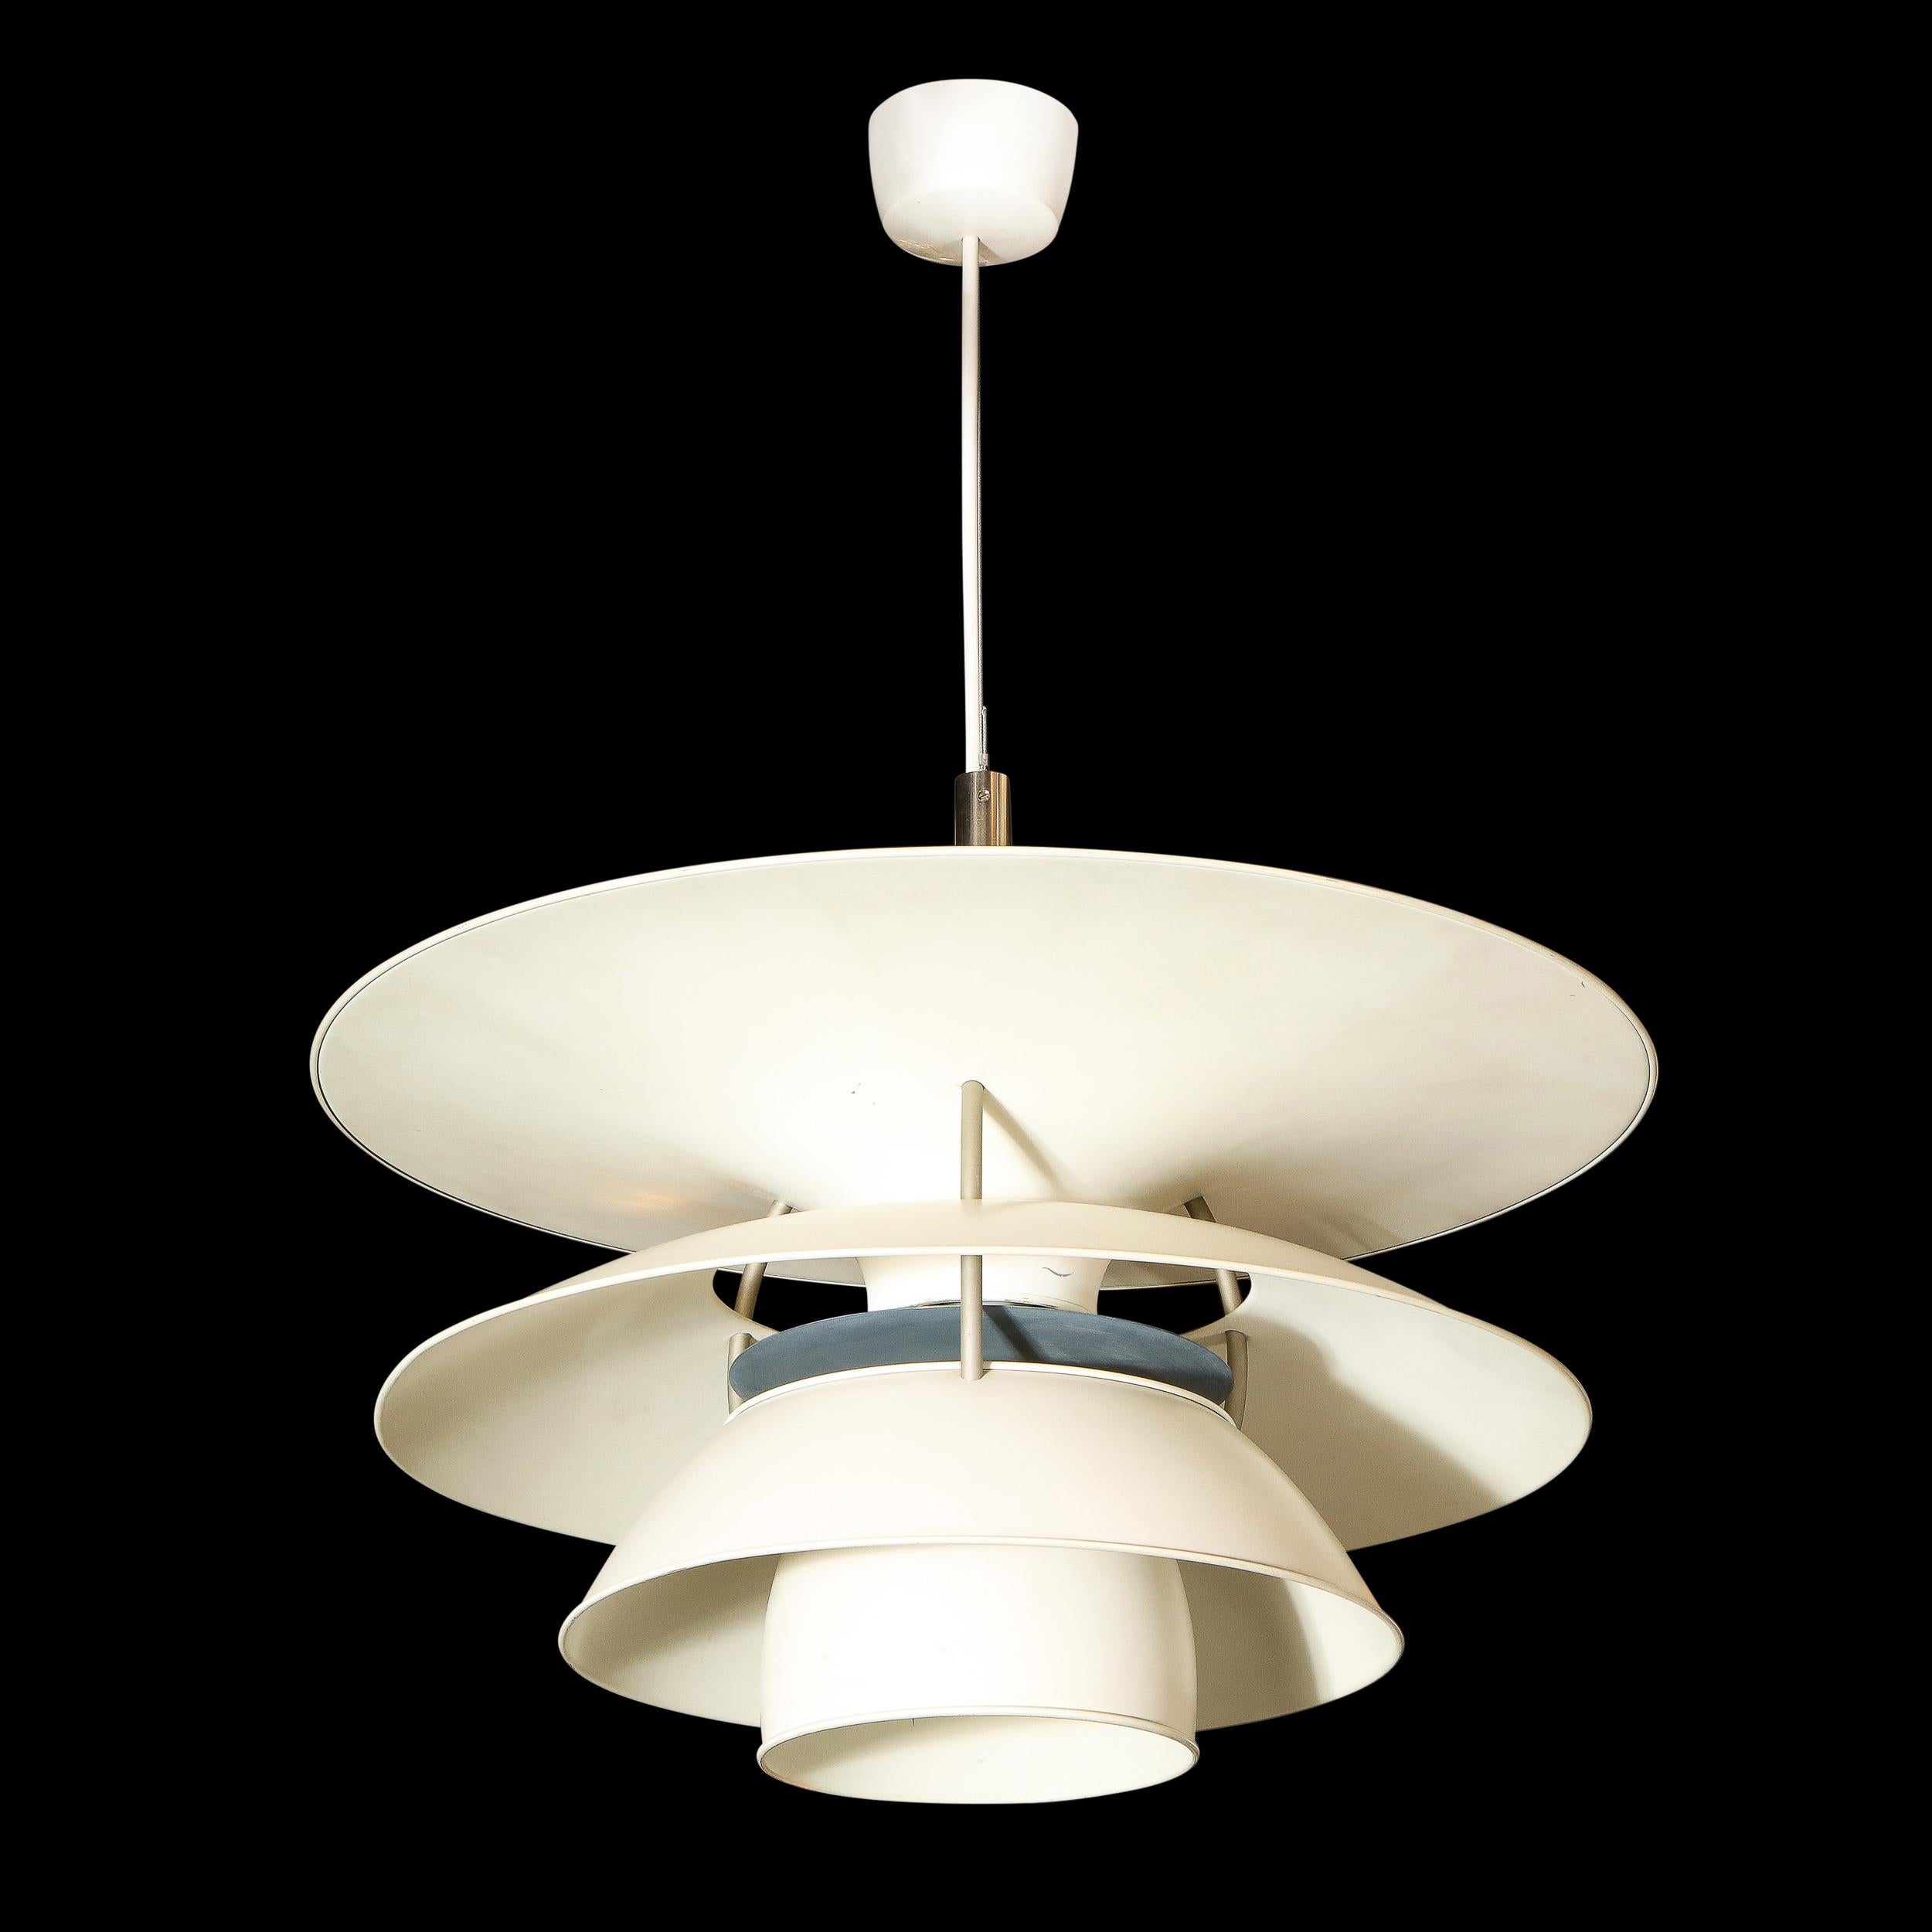 Renowned designer, Poul Henningsen designed the four-shade system which was launched in 1931 to create a fixture that could be mounted high and serve as an alternative to the commonly used chandeliers. The PH four-shade fixture was designed to